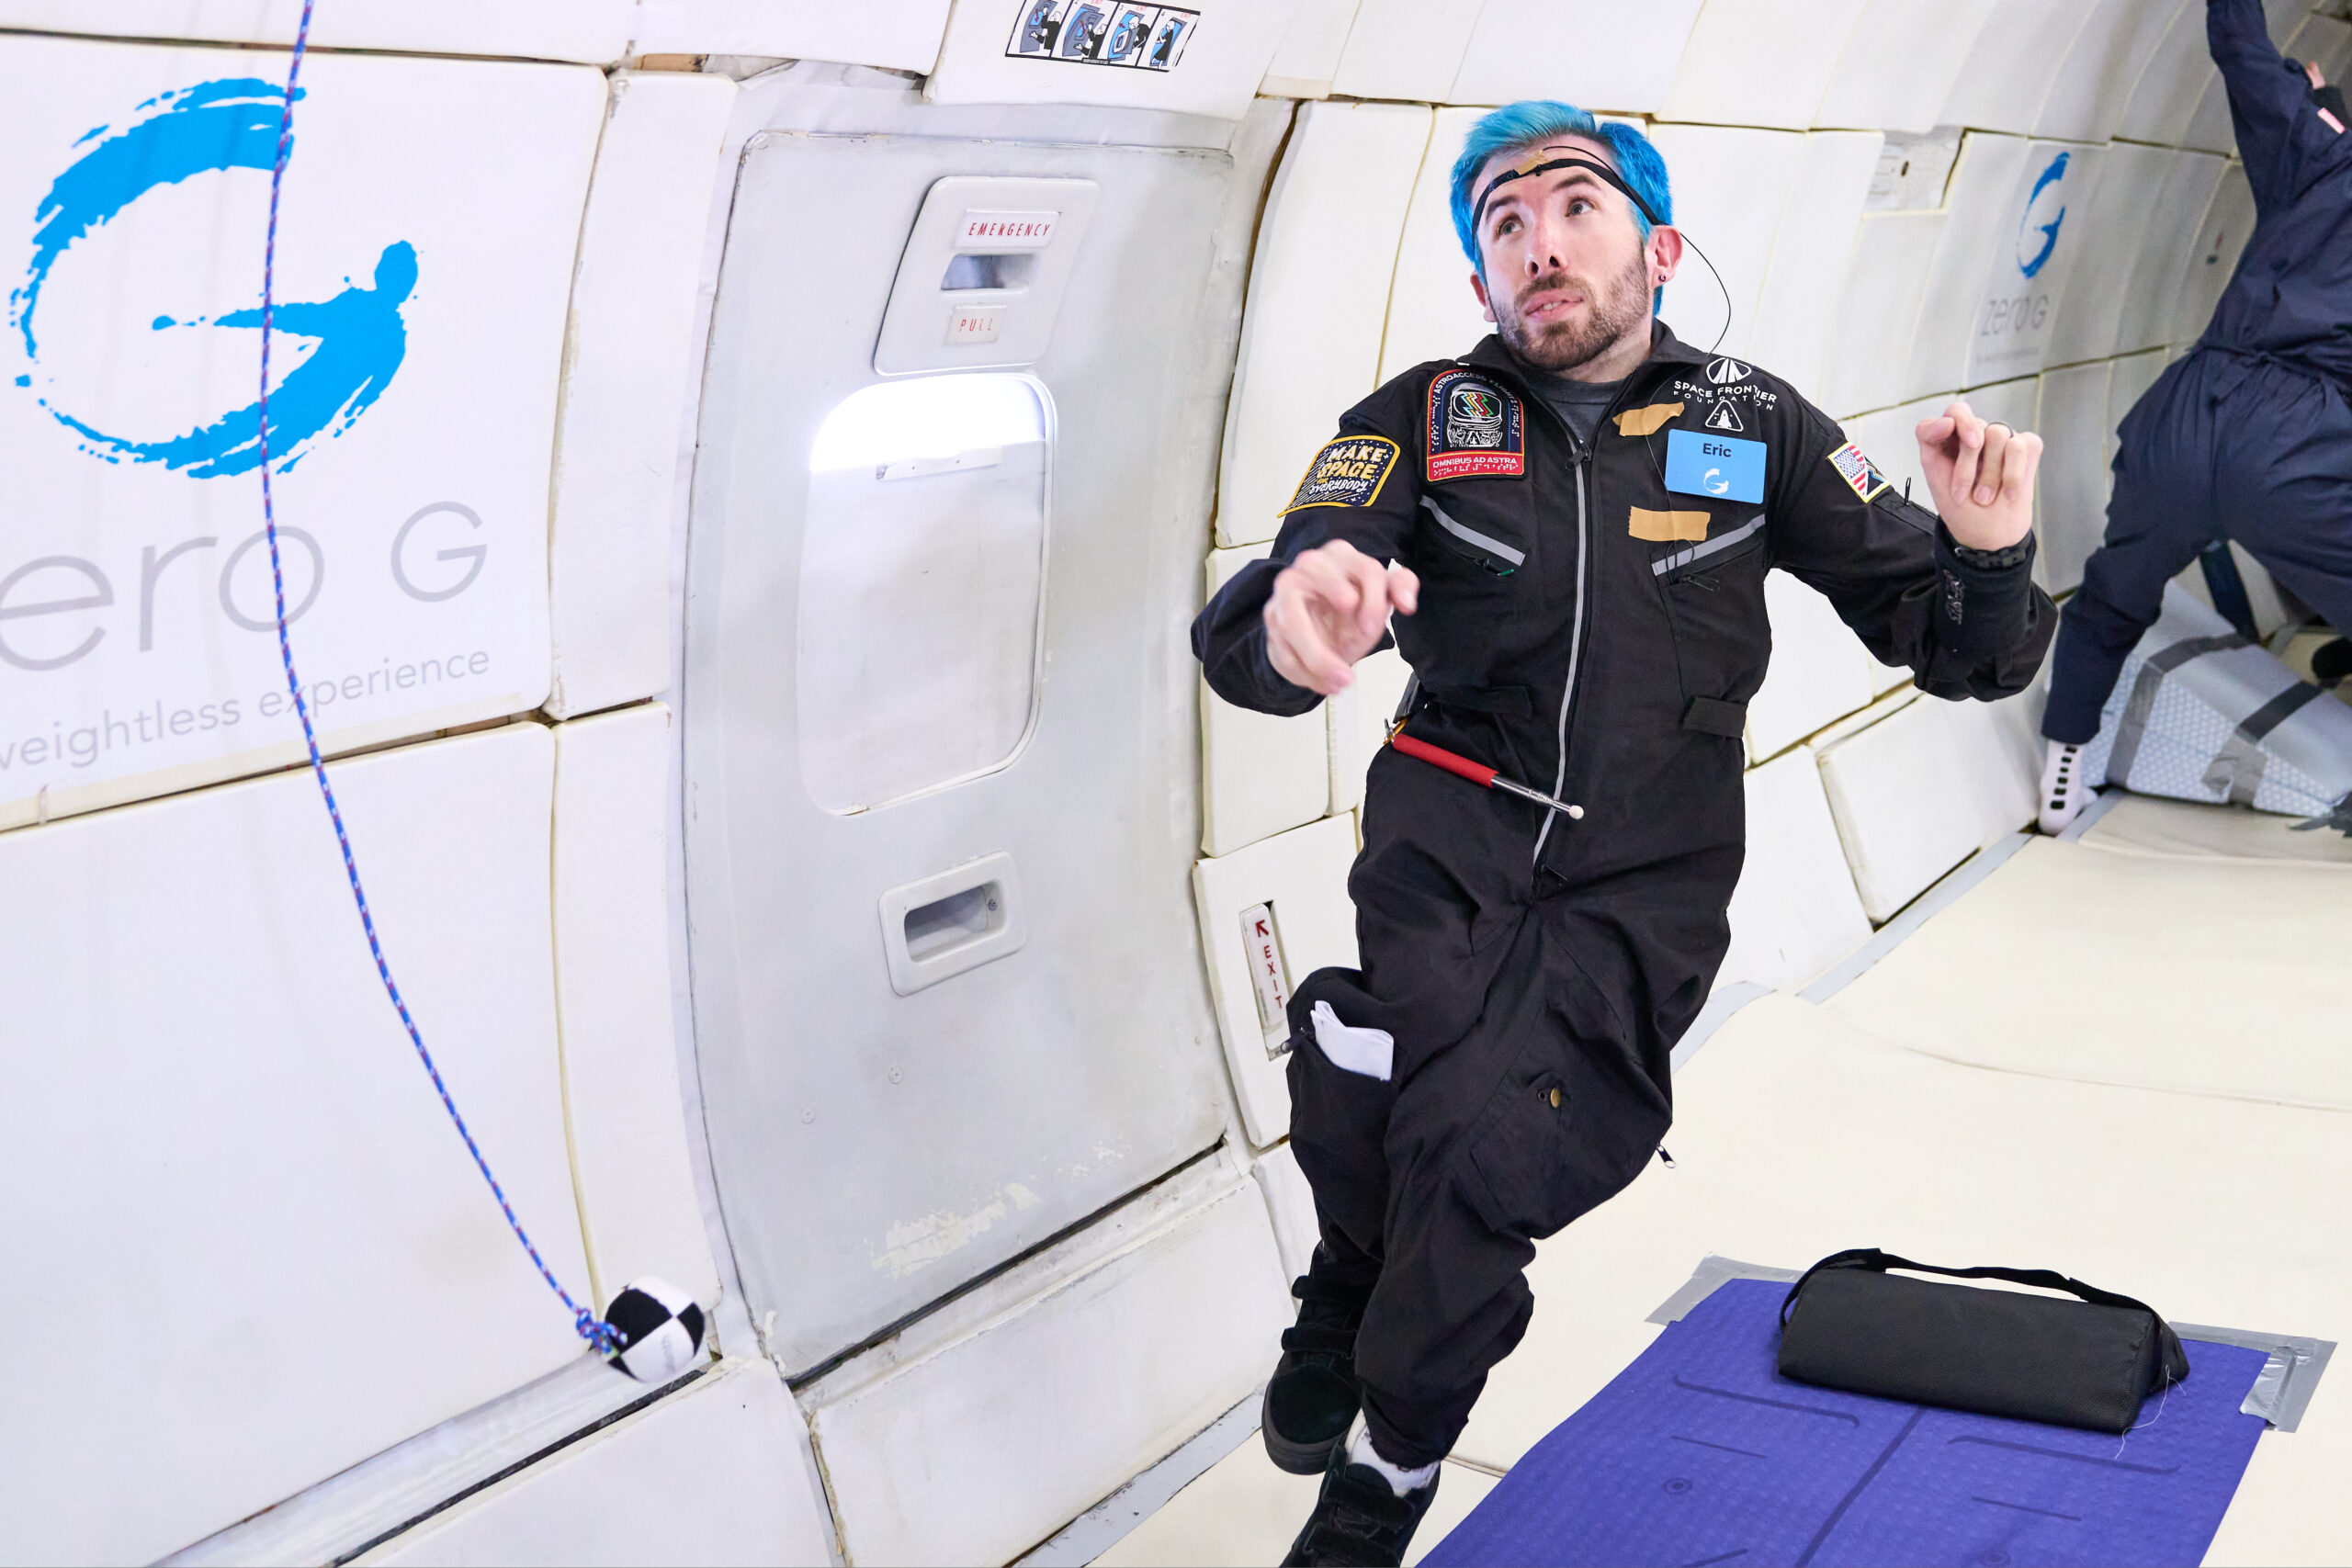 Professor Stephen Hawking floating during a ZERO-G flight in 2007. Hawking said of this experience, “For me, this was true freedom. People who know me well say that my smile was the biggest they'd ever seen. I was Superman for those few minutes." Credit: Steve Boxall/ ZERO-G.